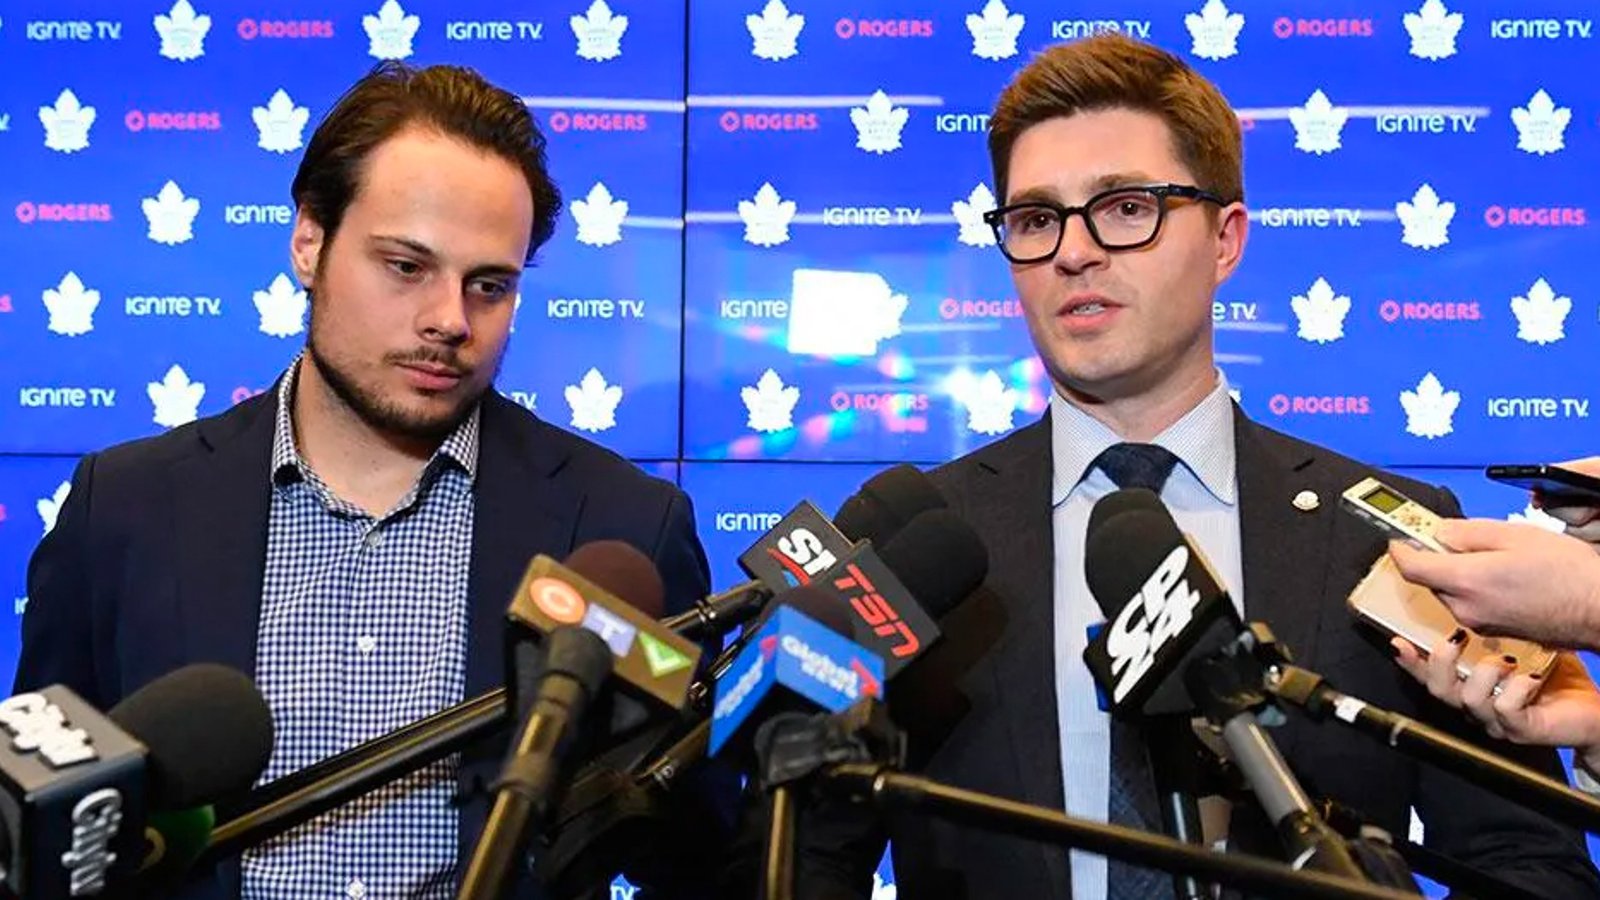 Kyle Dubas, Auston Matthews and their agents under review by NHL and NHLPA